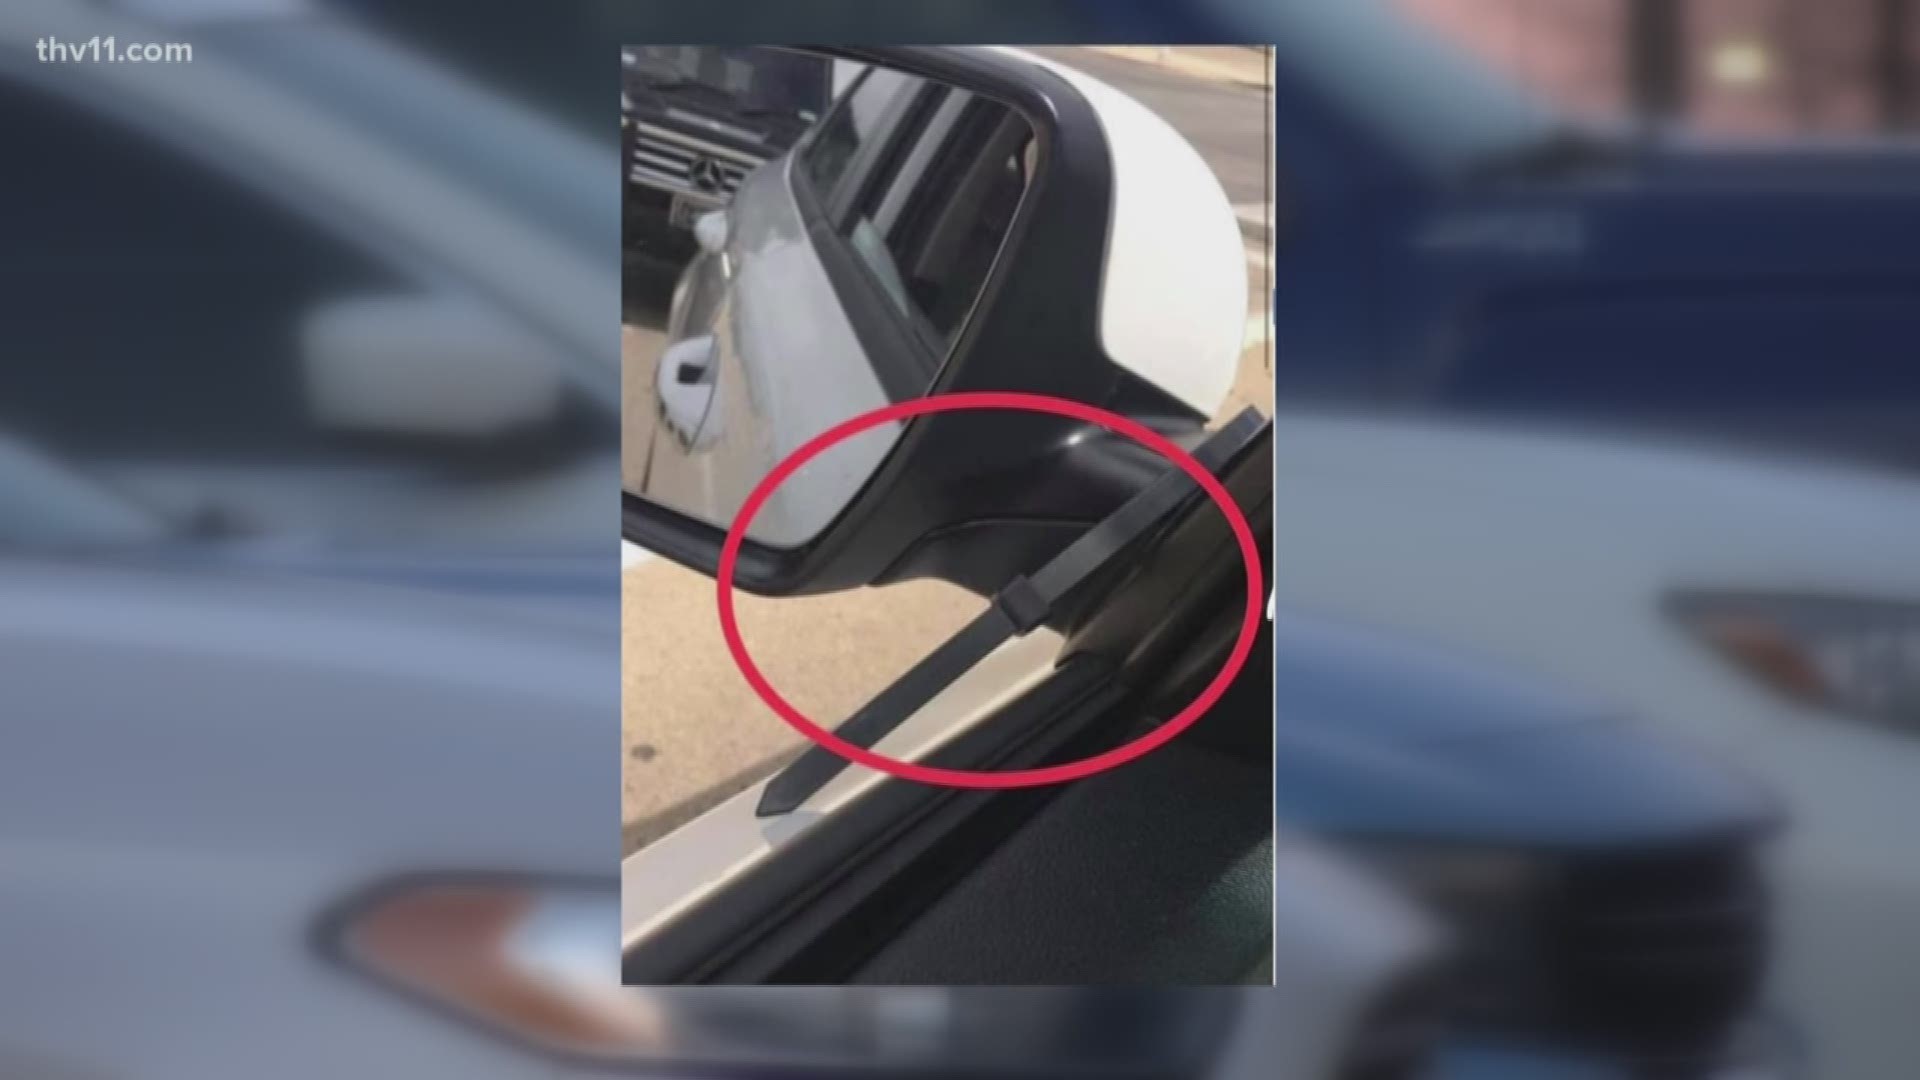 Some central Arkansas police say viral posts about a human trafficking tactic by putting zip ties on cars is not something departments have seen recently.